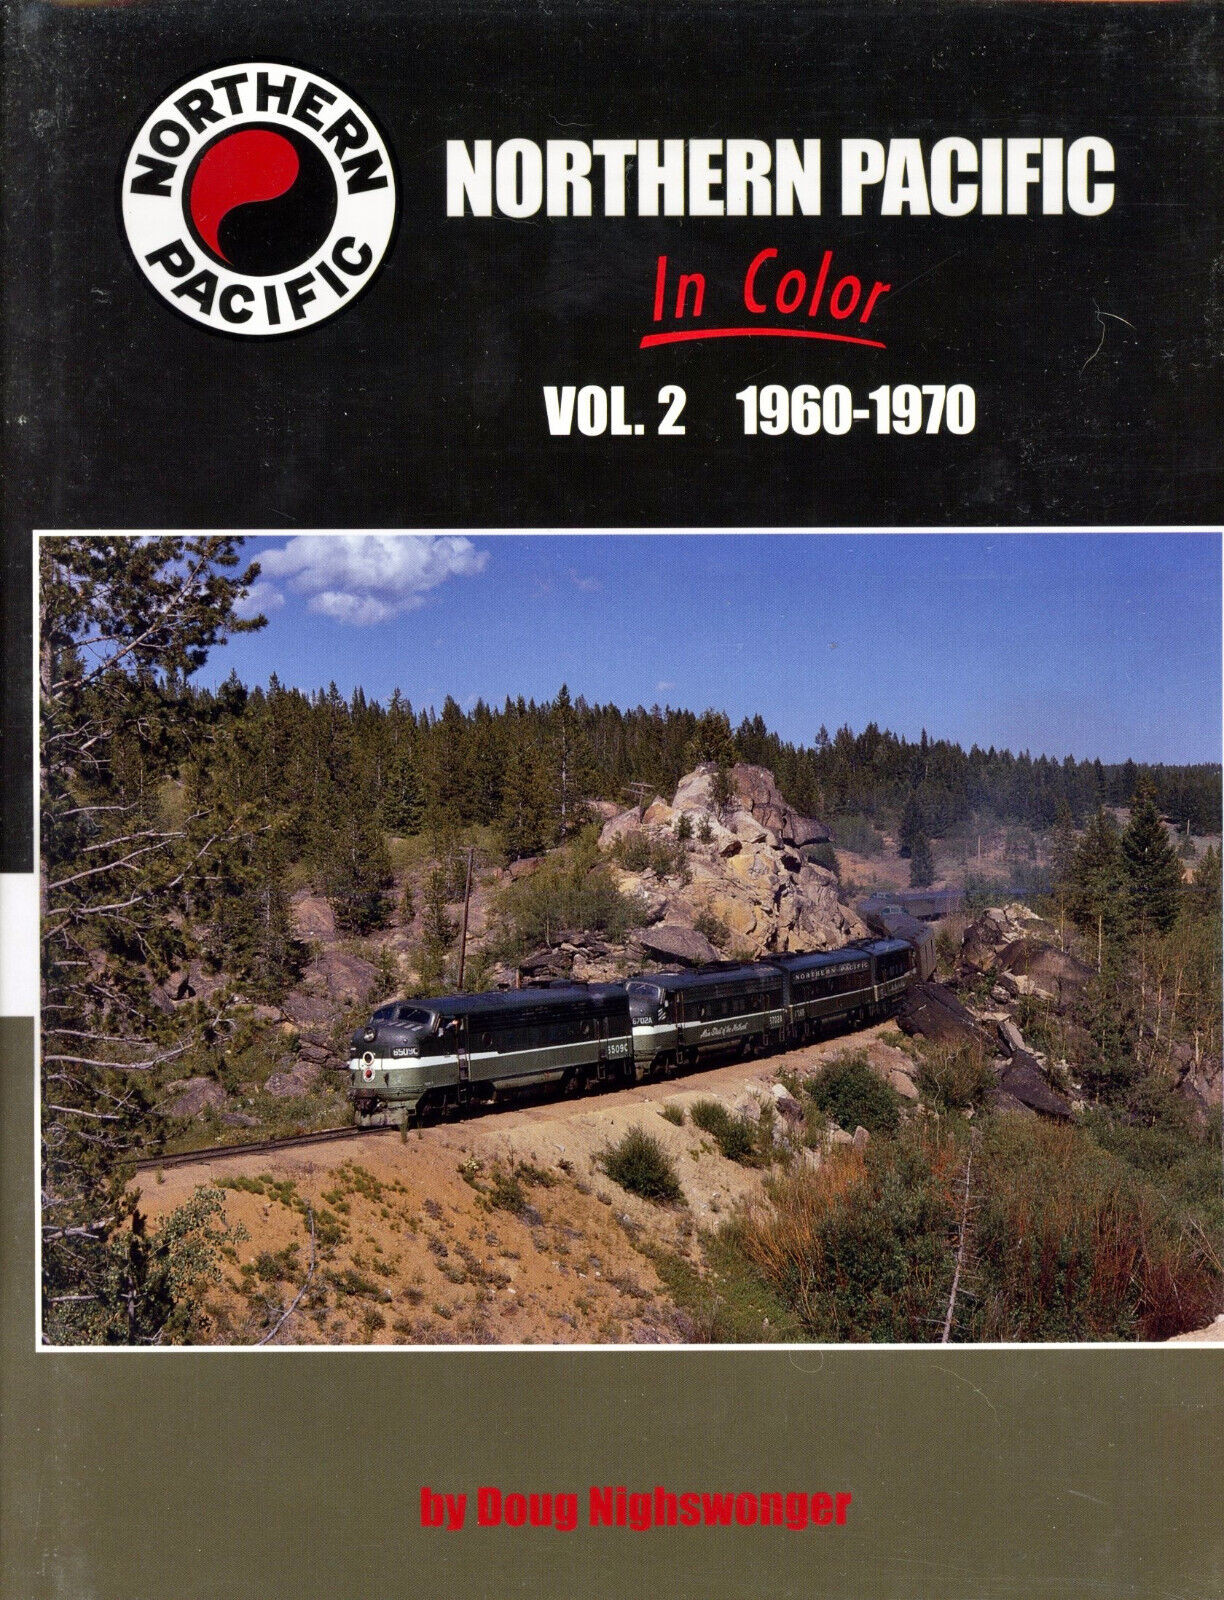 Northern Pacific in Color Volume 2 1960-1970, Nighswonger, First Printing